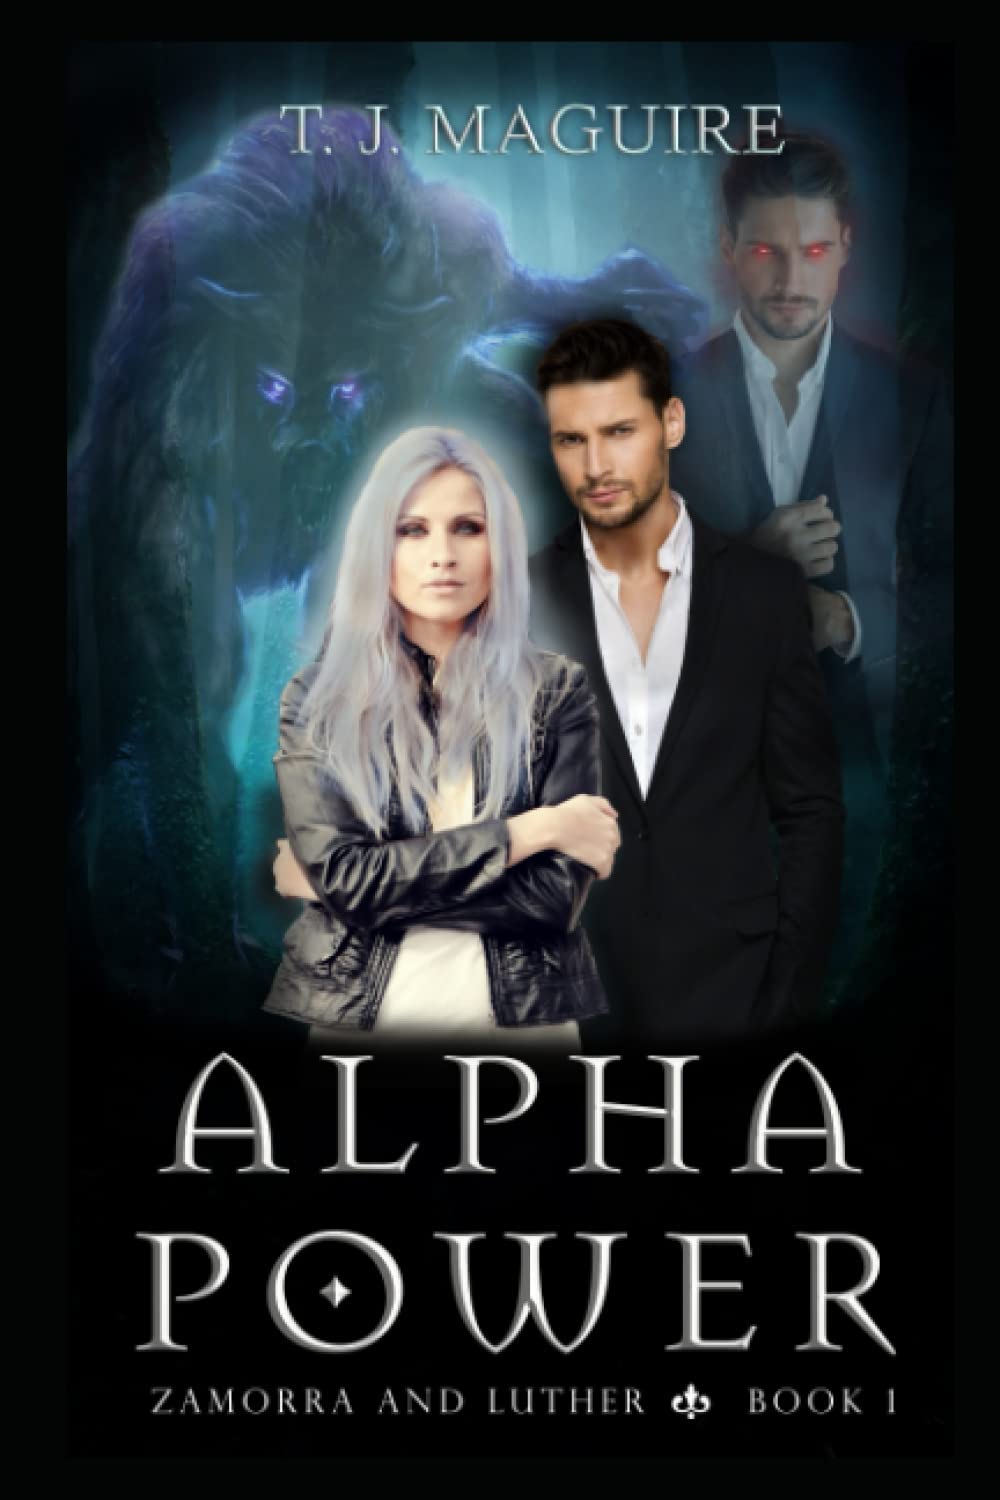 Alpha Power by T. J. Maguire